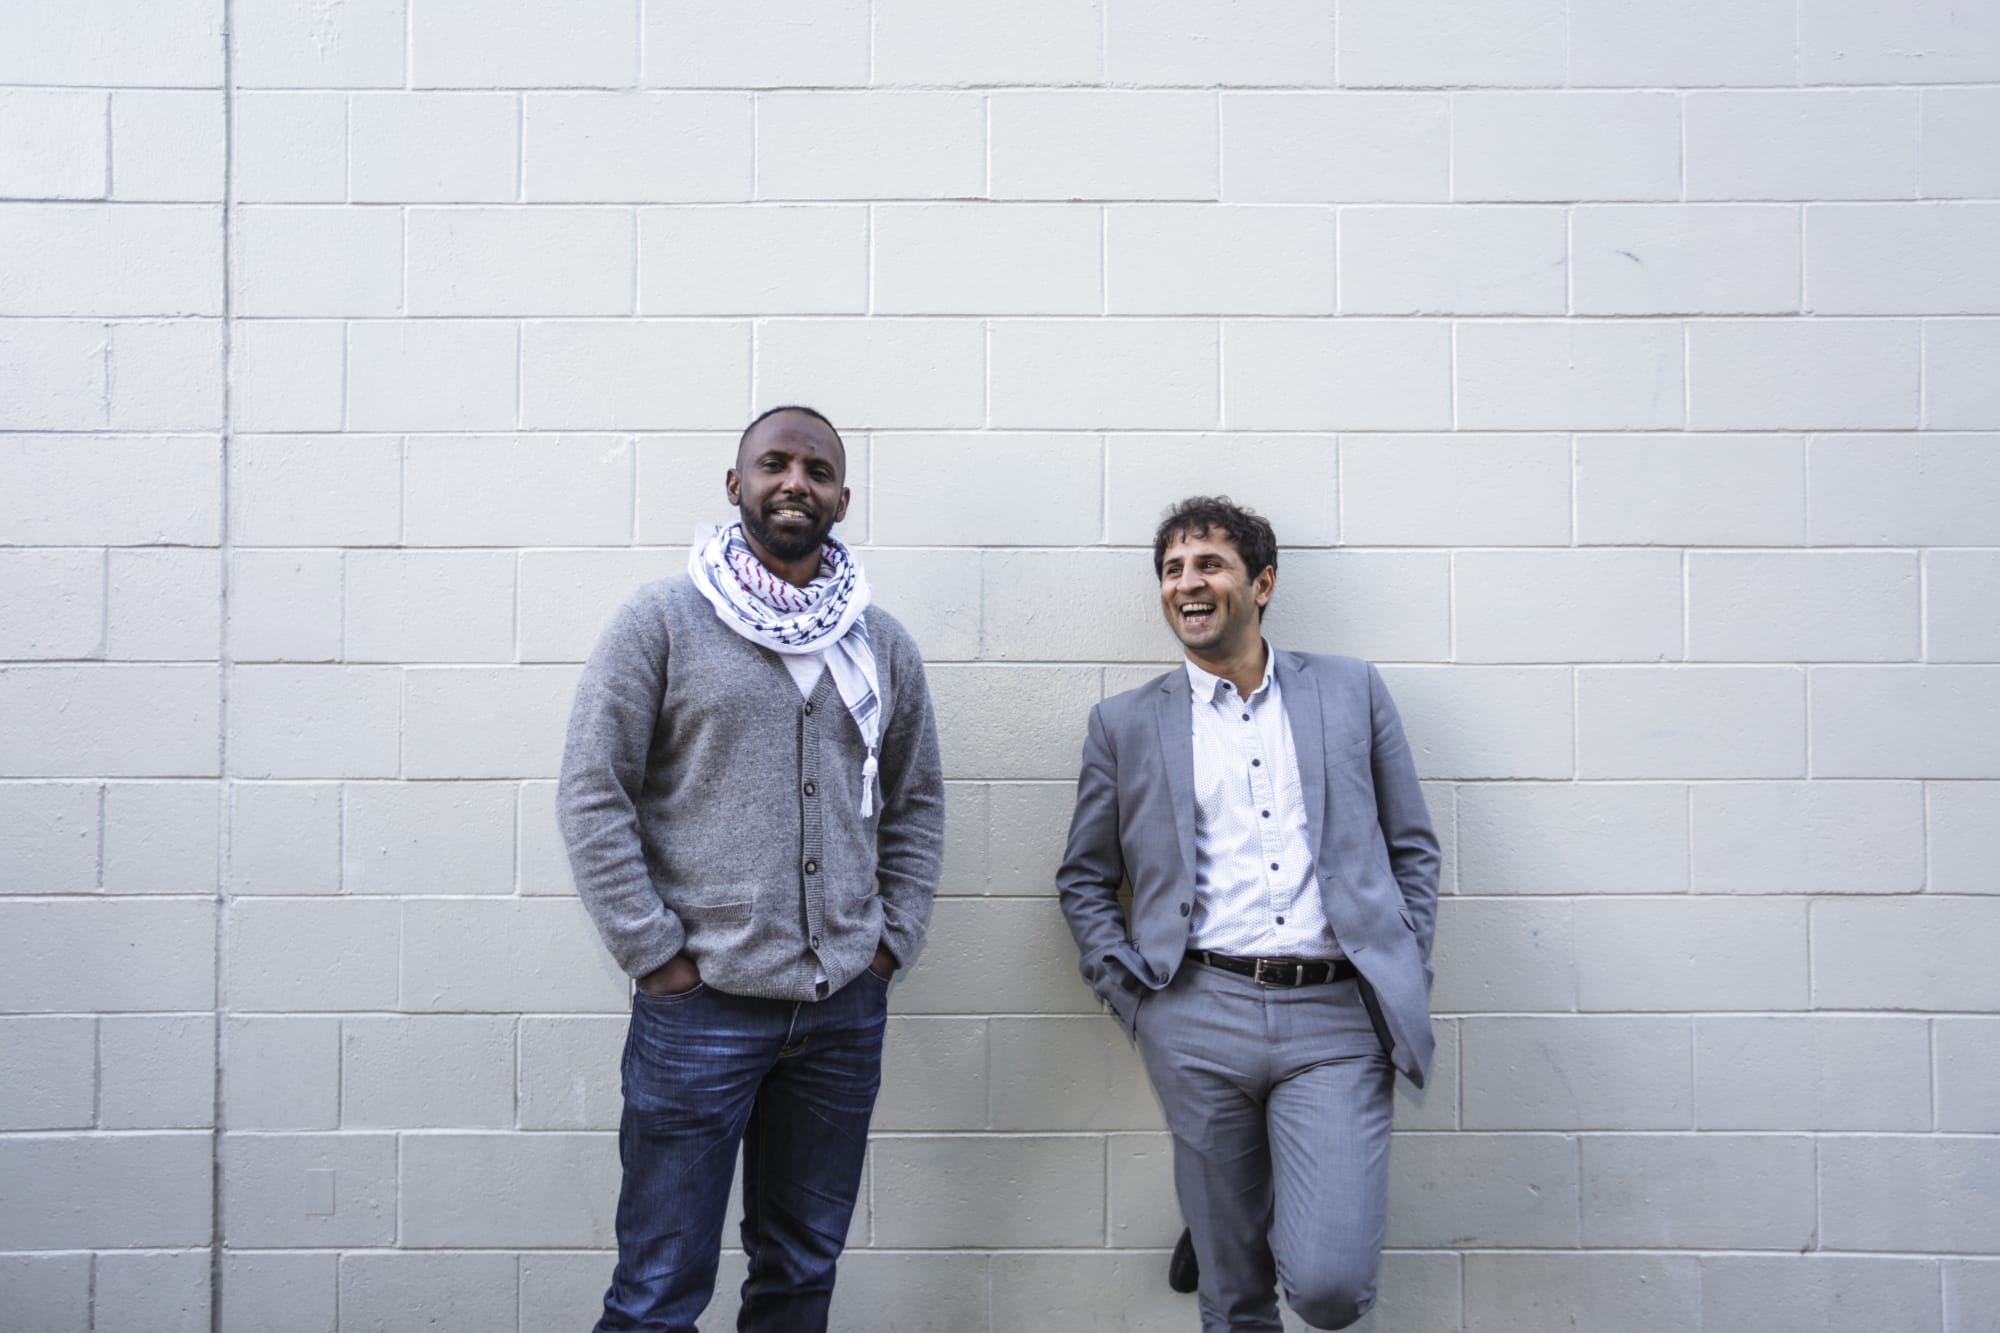 Ibriham Omer, left, and Ali Mazraeh have both lived in New Zealand for about a decade and are now members of the ChangeMakers Forum - an advocacy group for refugees